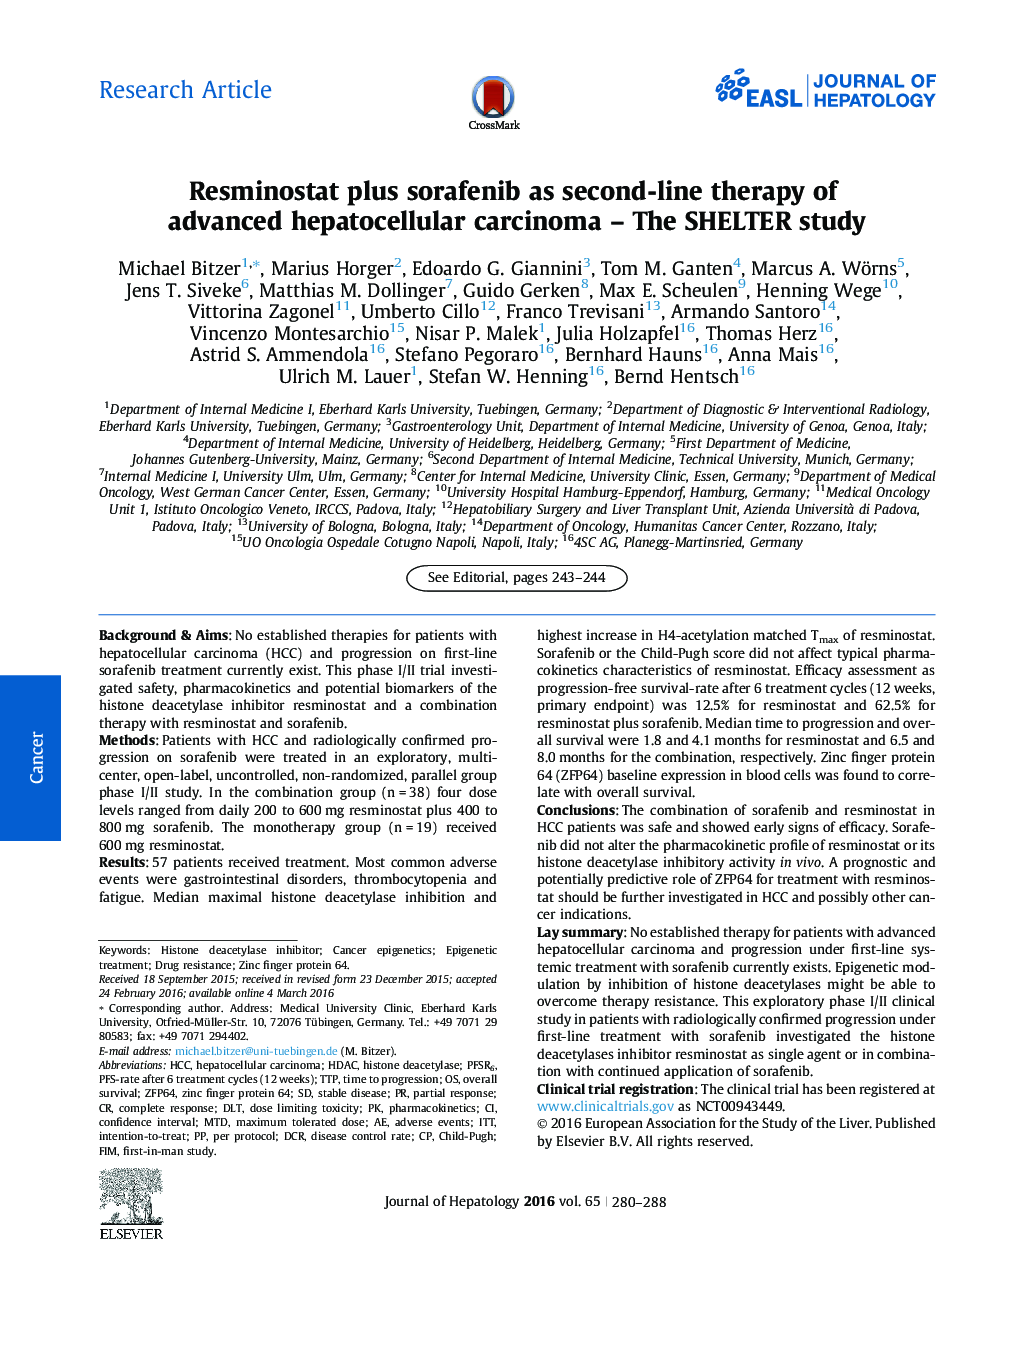 Resminostat plus sorafenib as second-line therapy of advanced hepatocellular carcinoma – The SHELTER study